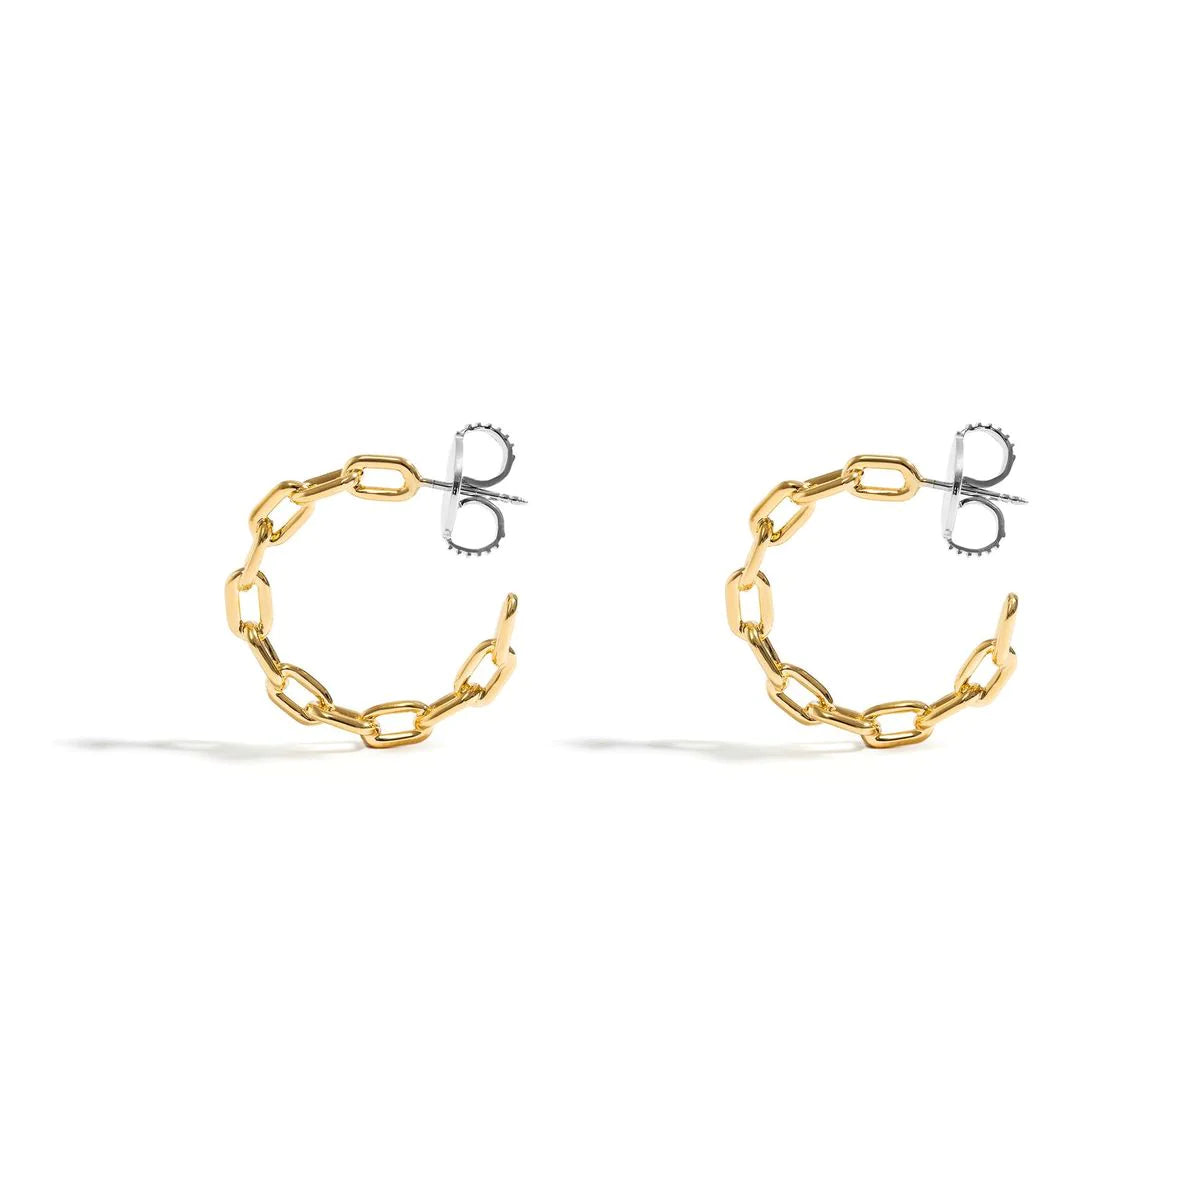 SMALL CHAIN HOOP EARRING IN 18K YELLOW GOLD PLATED SILVER